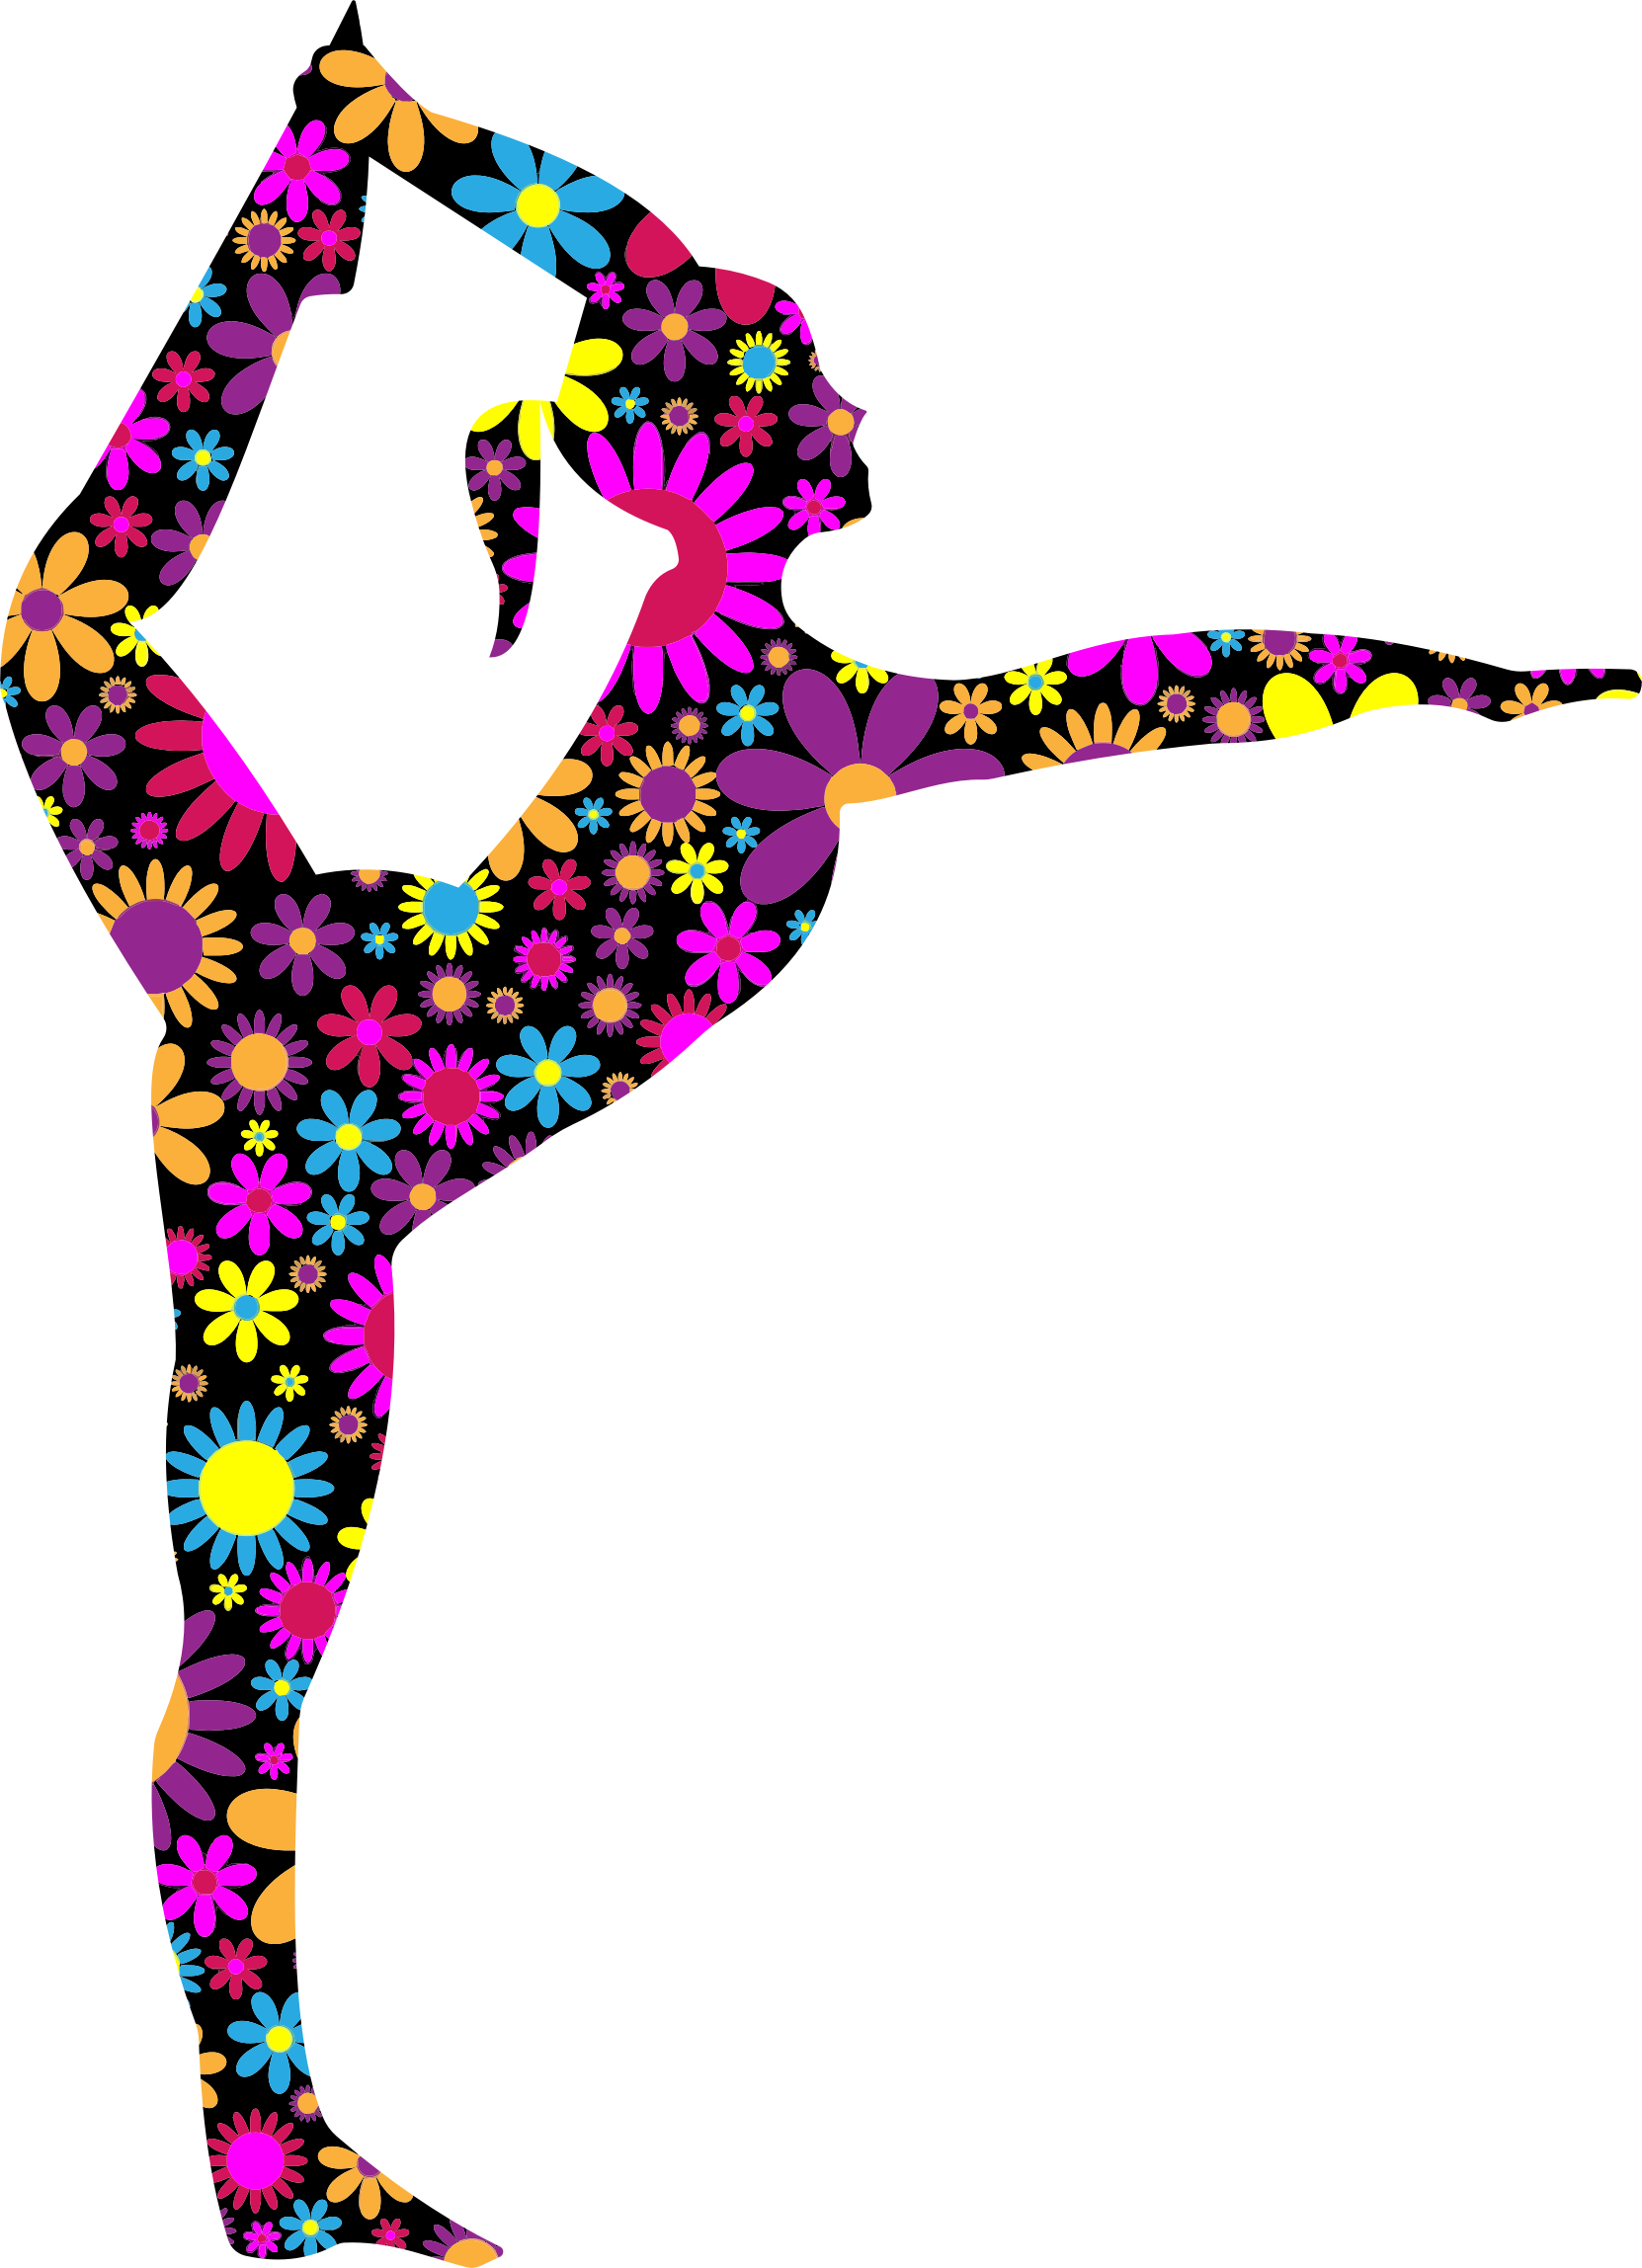 Floral Stretching Ballerina Silhouette By Gdj - Baseball: There Is No Crying In Baseball. (1662x2296)